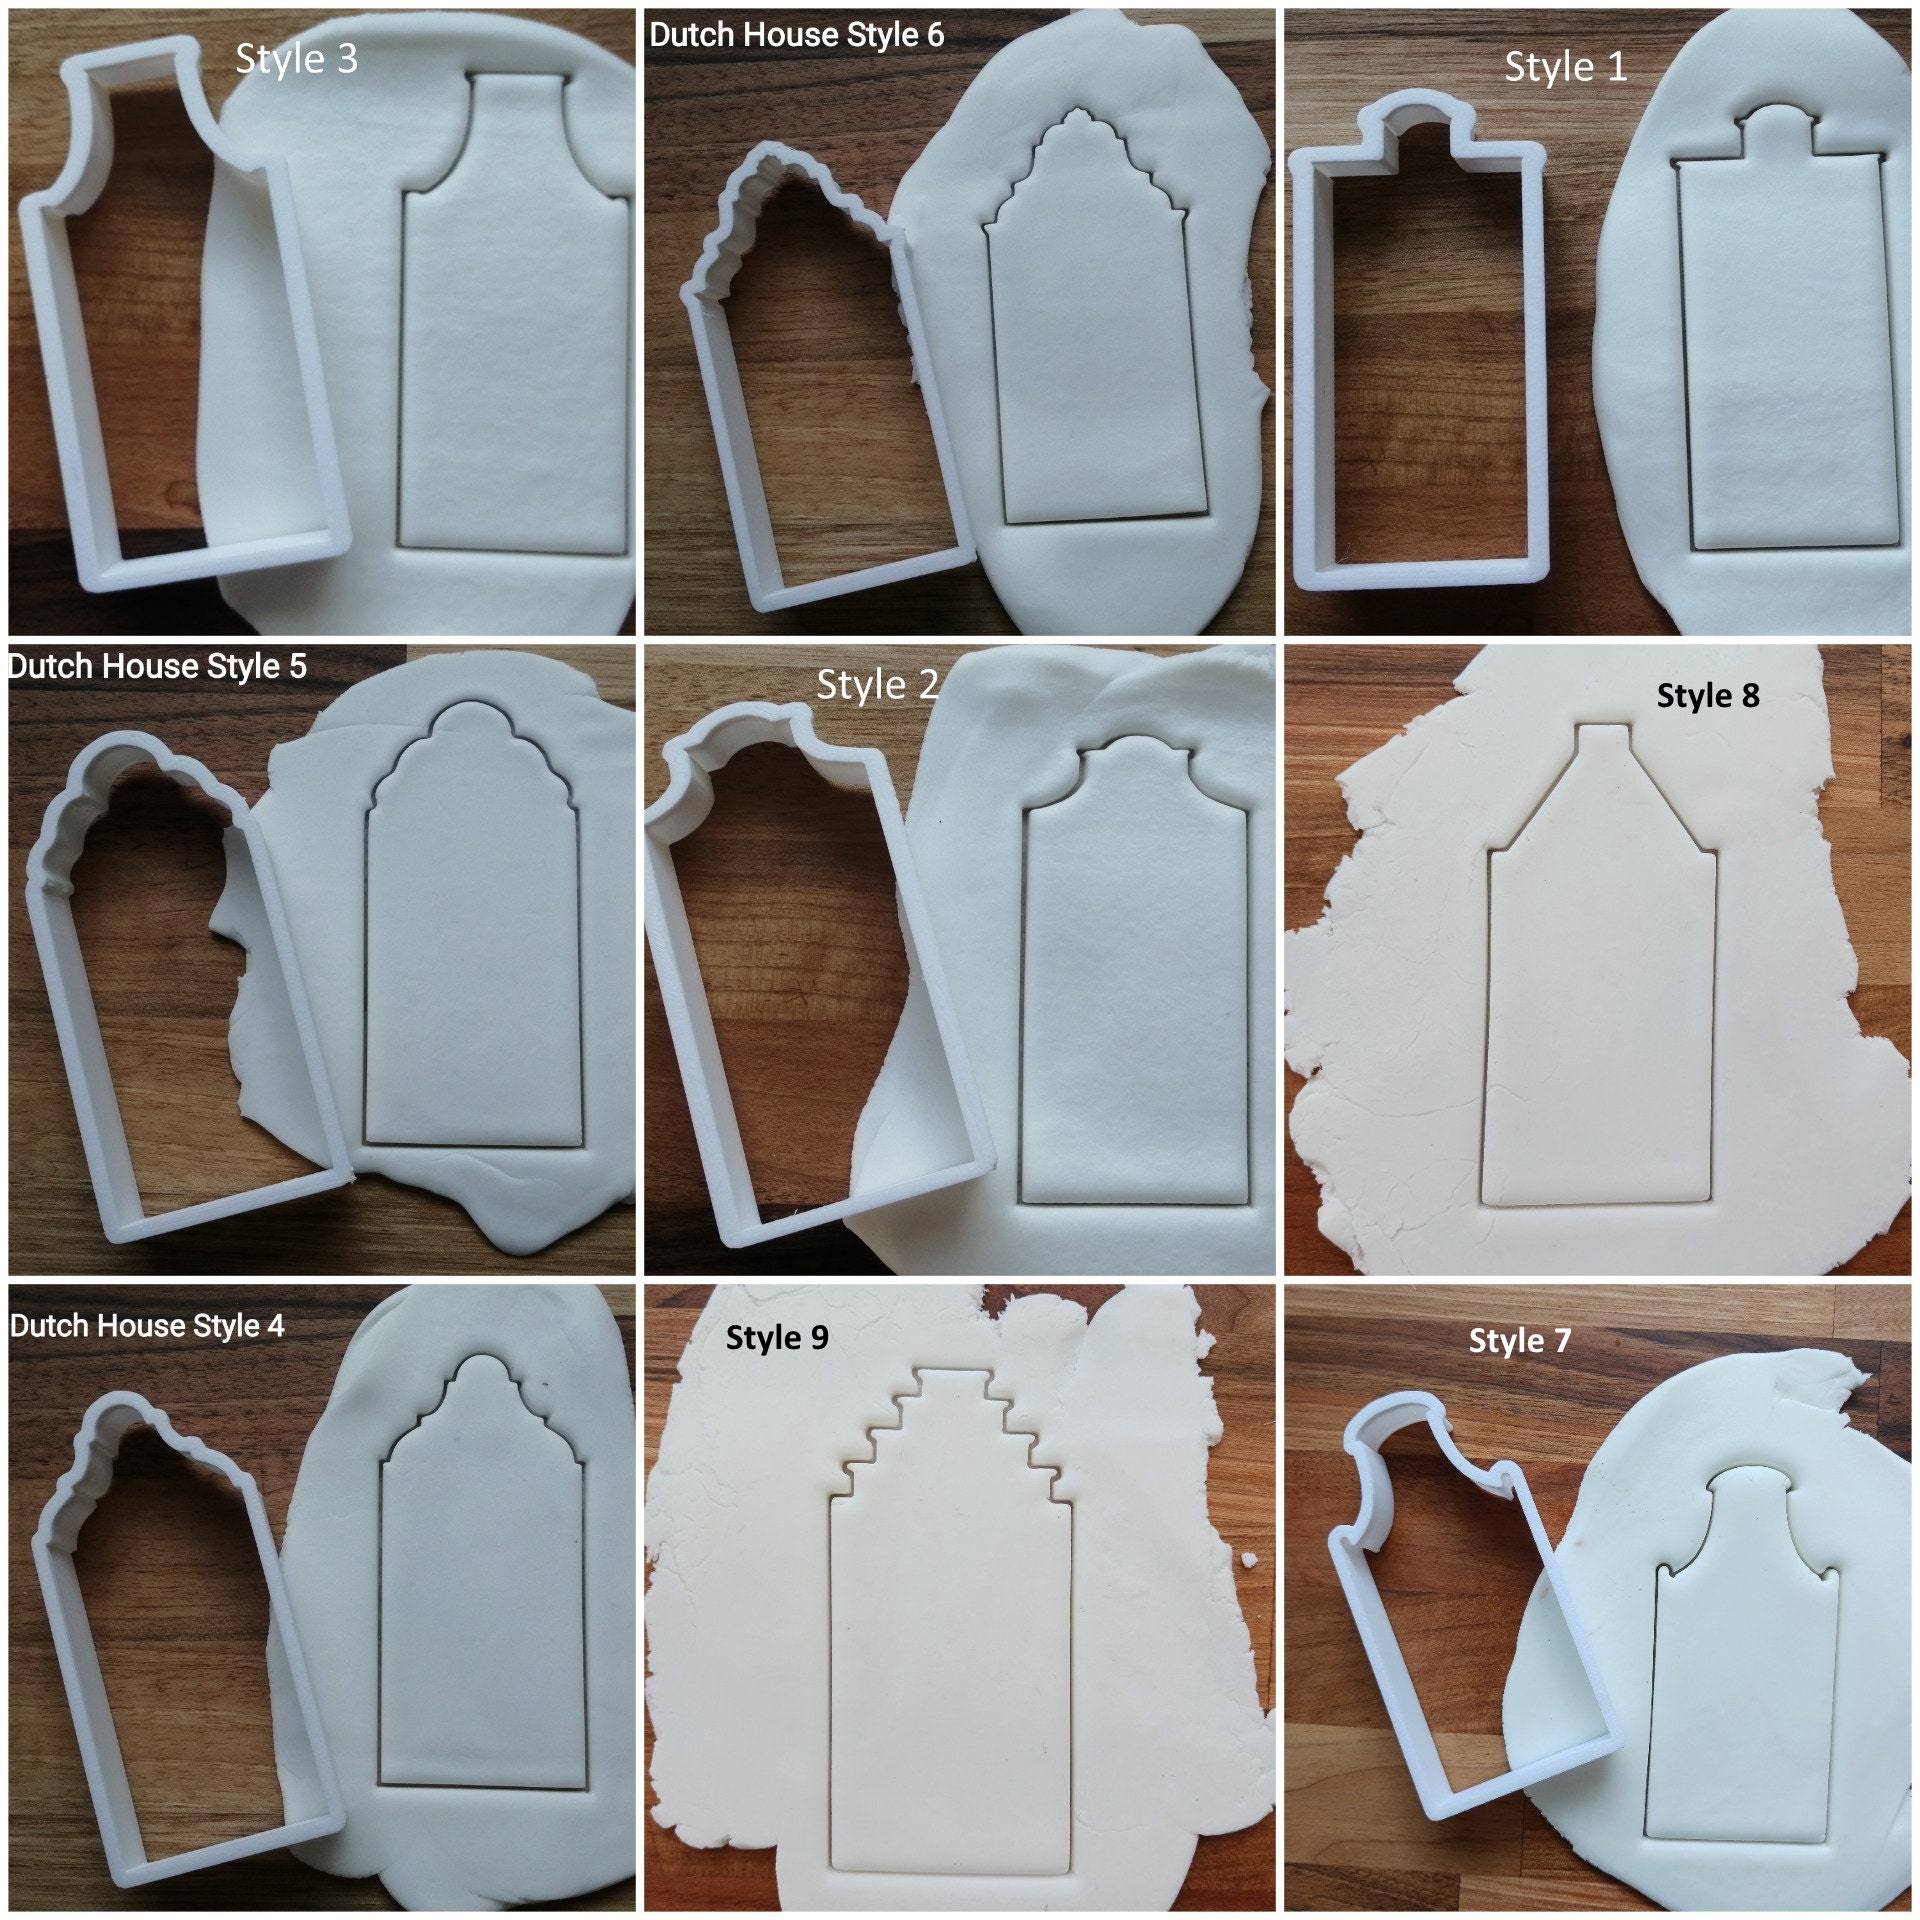 Amsterdam Canal House Cookie Cutter Set (Facades)